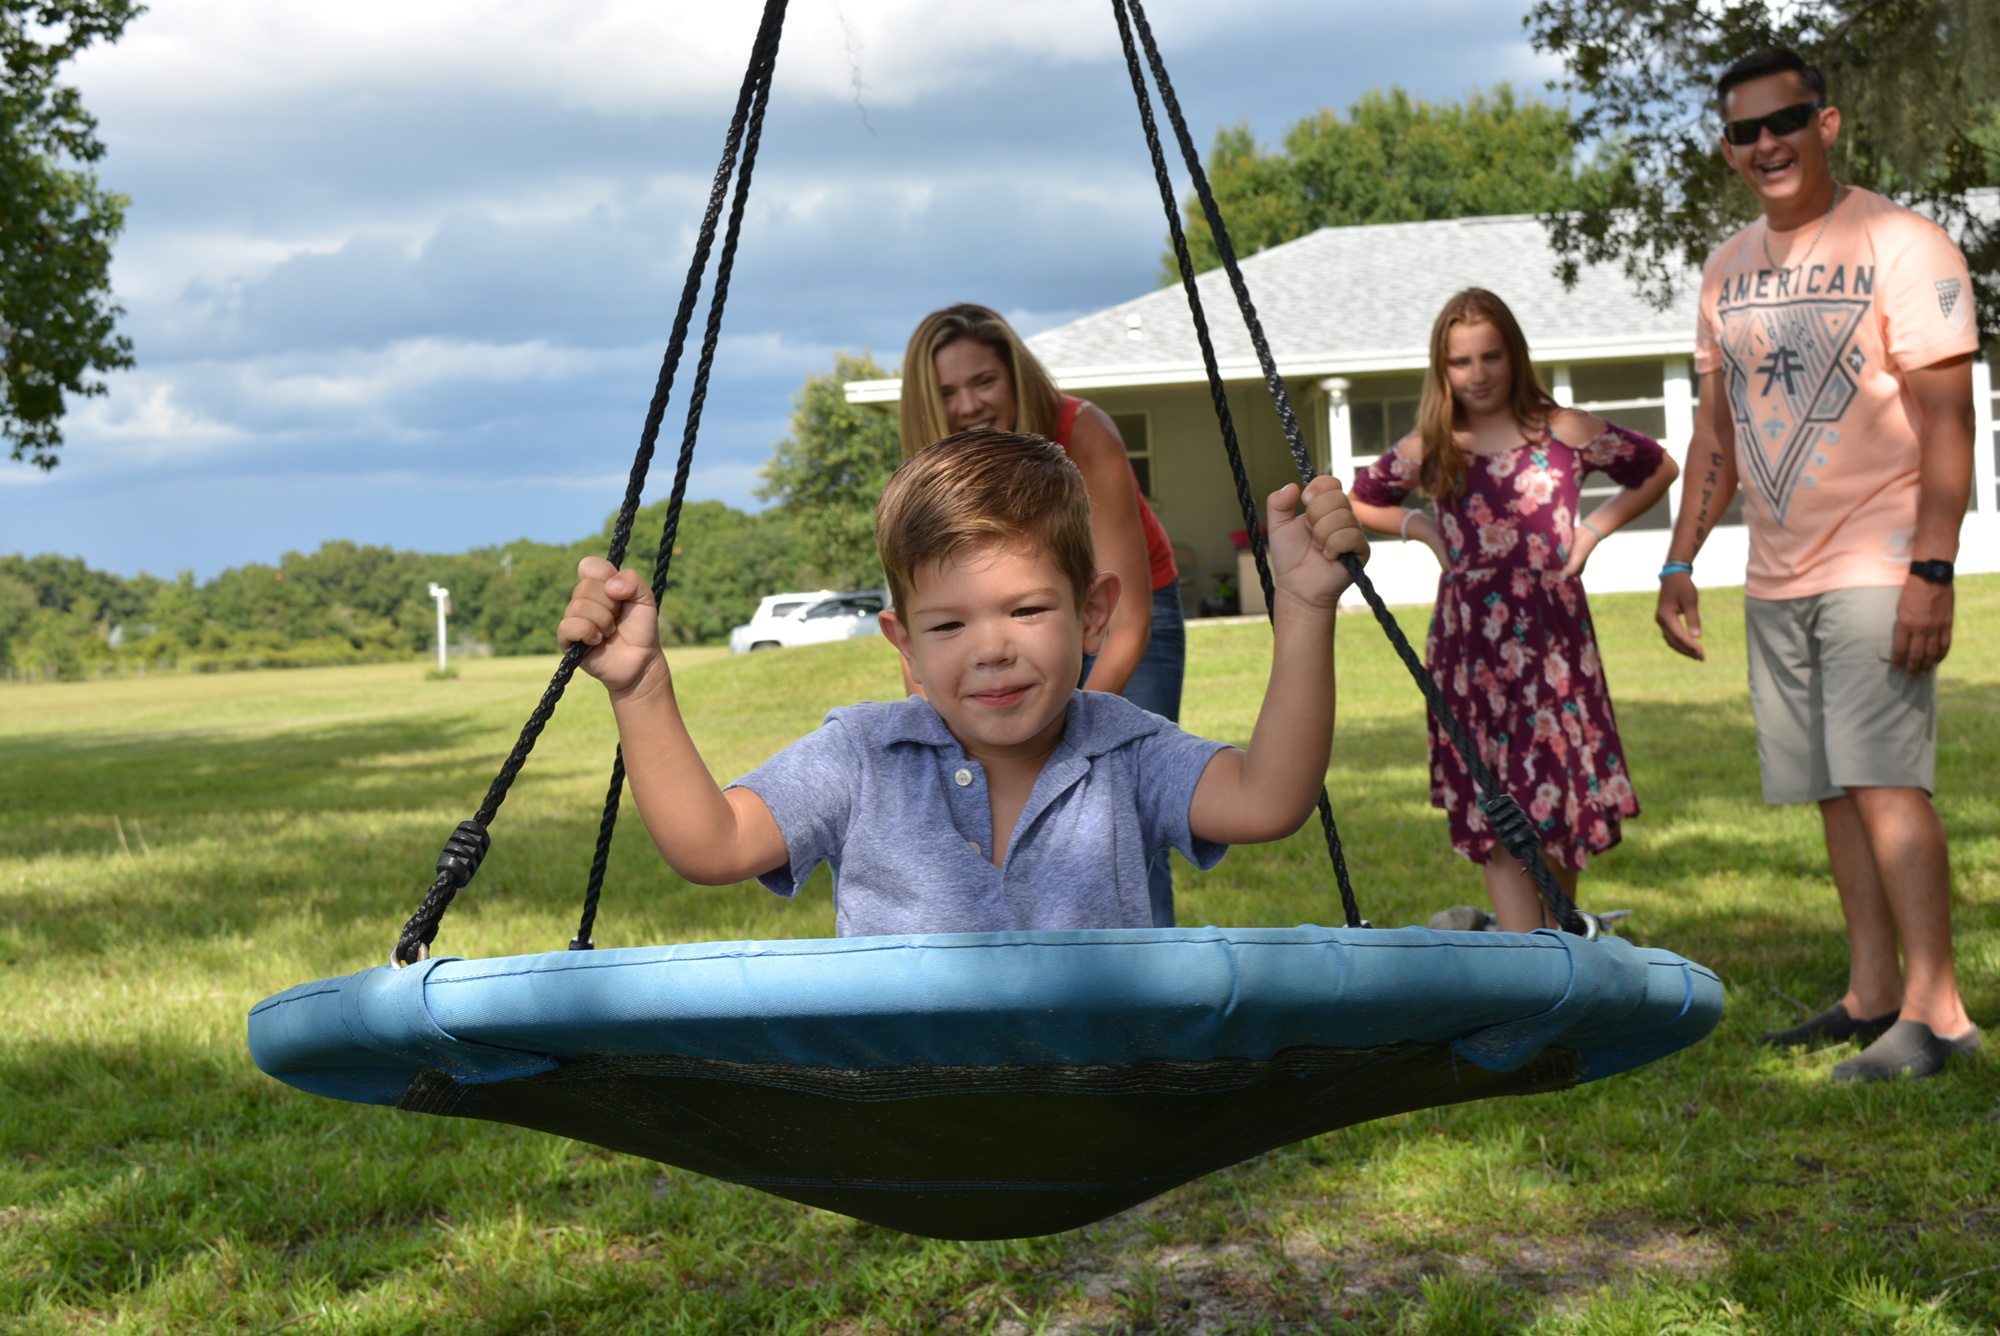 Colton Lawson, 3, loves the swing in his backyard. He prefers to ride it without his prosthetic legs. His parents, April Costello and Chris Lawson, and sister, Taylor Lawson, watch Colton swing with glee.